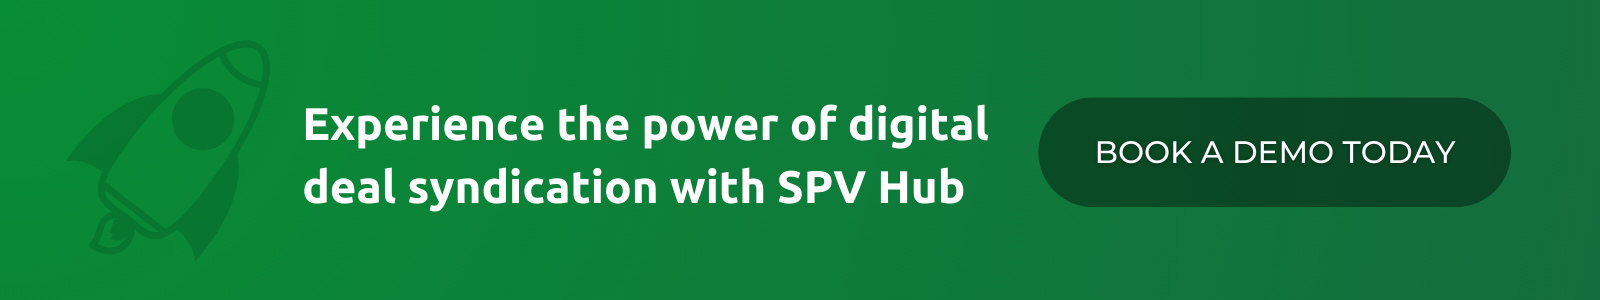 Experience the power of digital deal syndication with SPV Hub